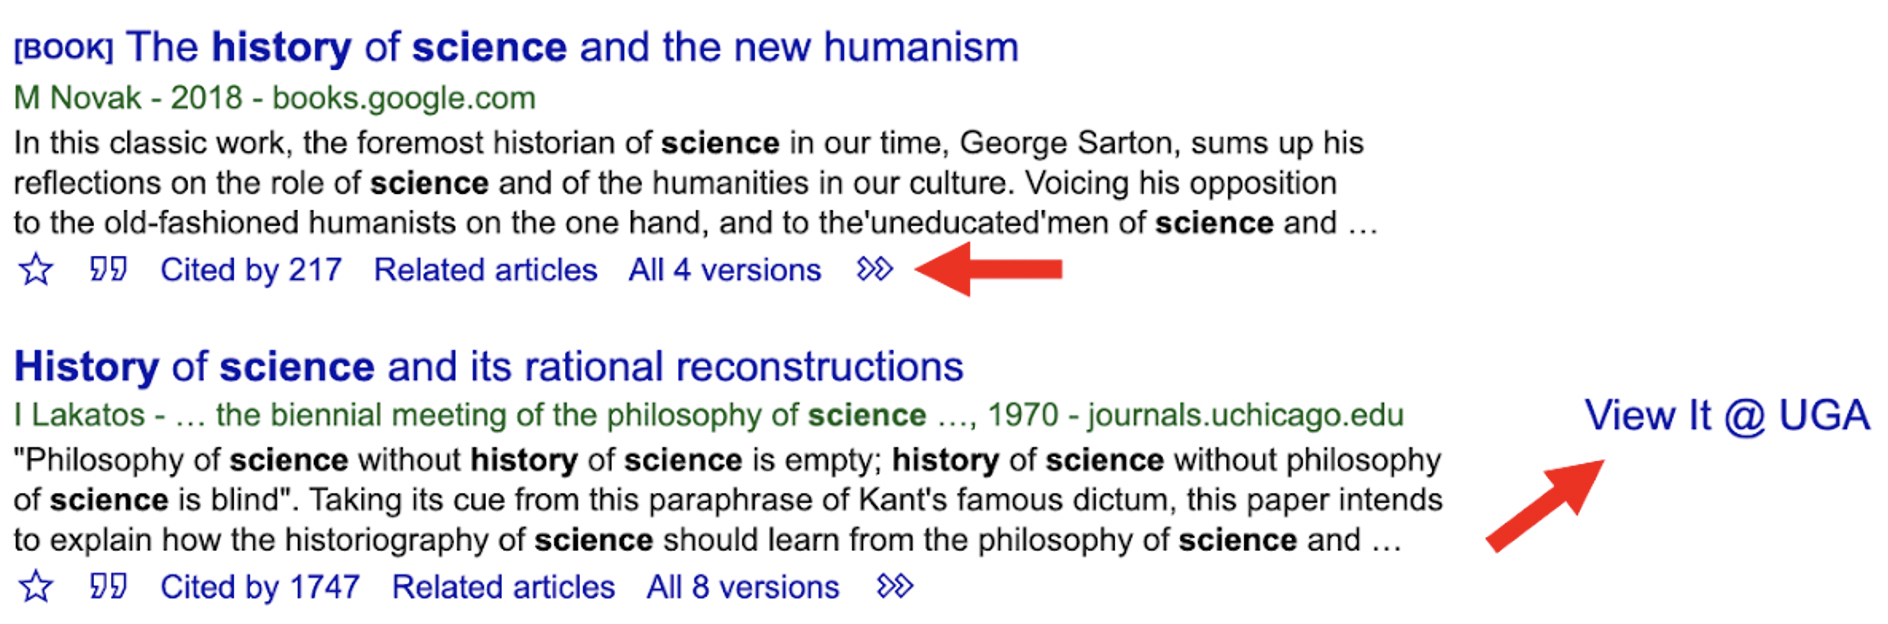 An arrow points at a VIEW IT @ UGA link in the margin of Google Scholar results. Another arrow points at the >> icon under a book citation in Google Scholar.  